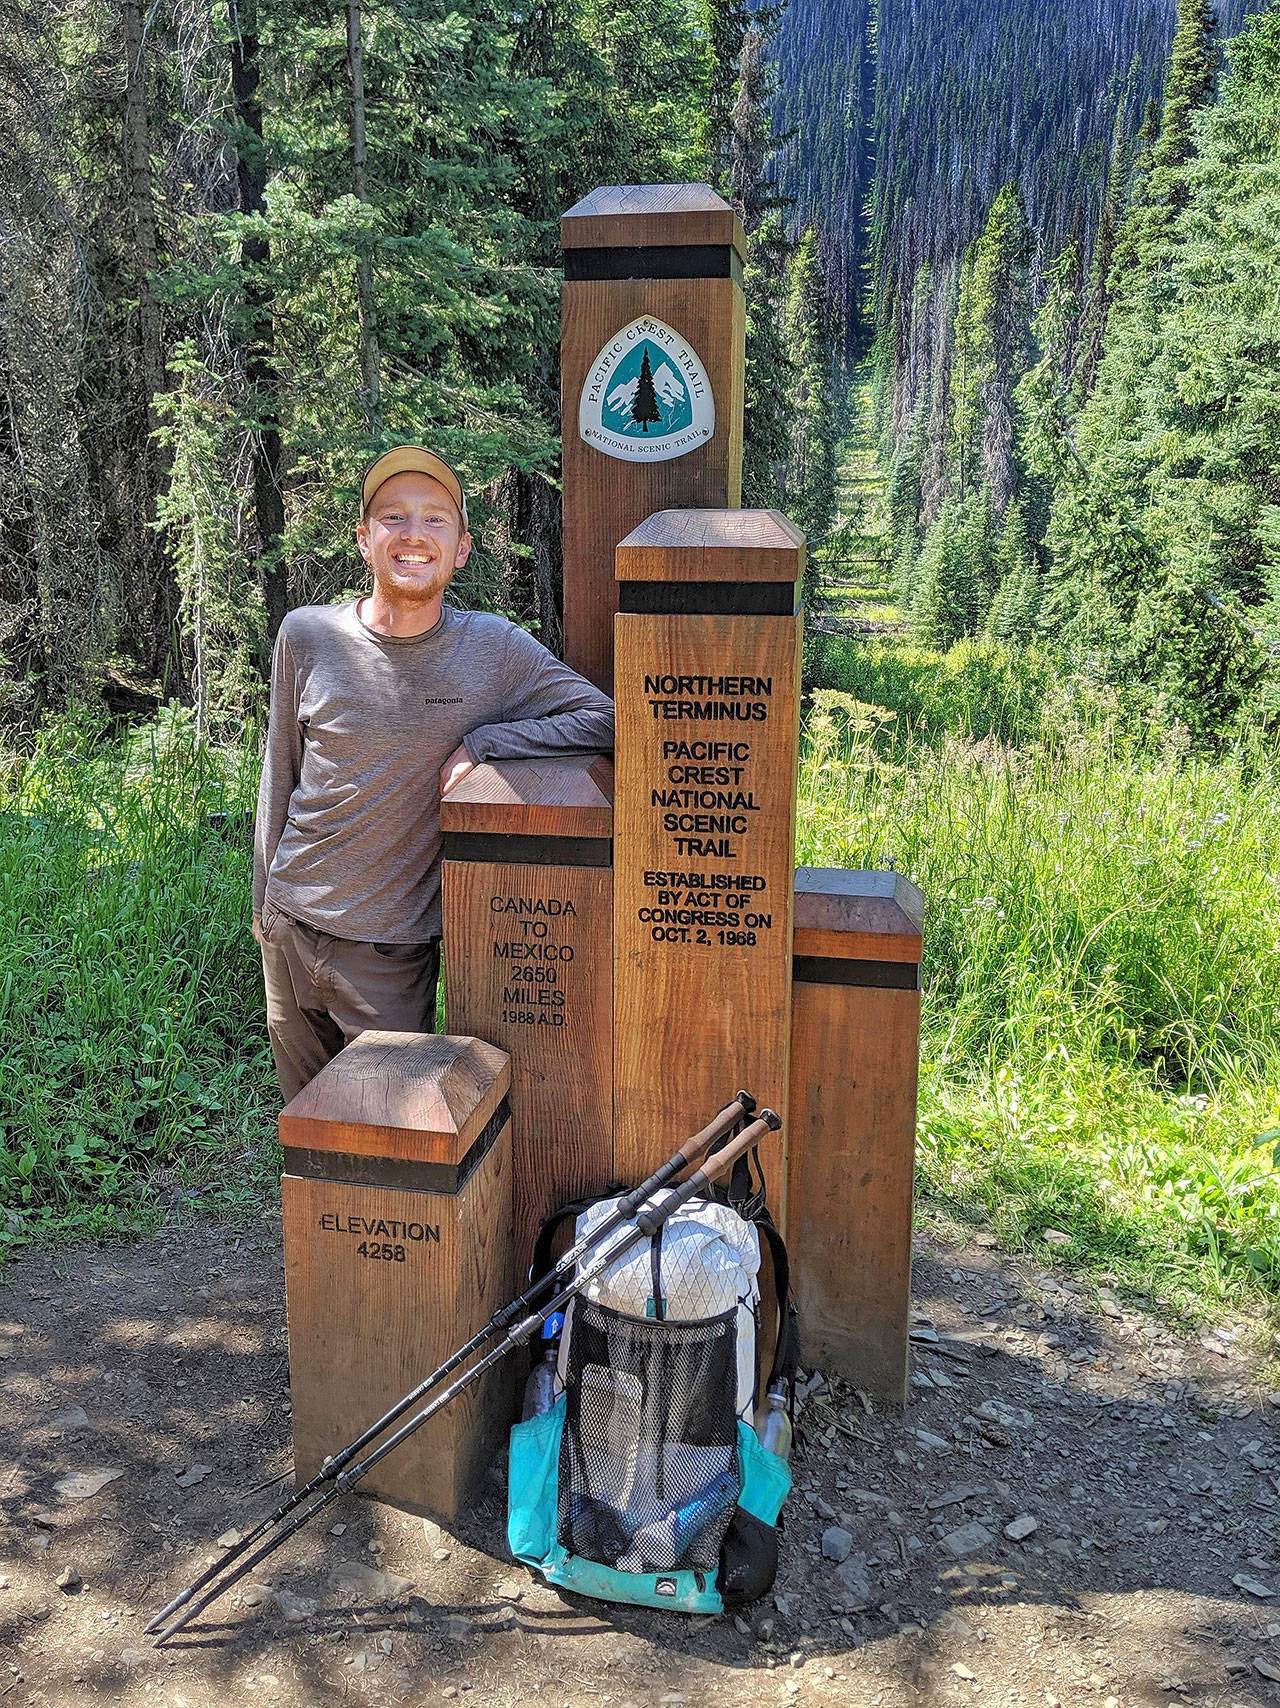 21-year-old Snoqualmie missionary comes home following PCT hike